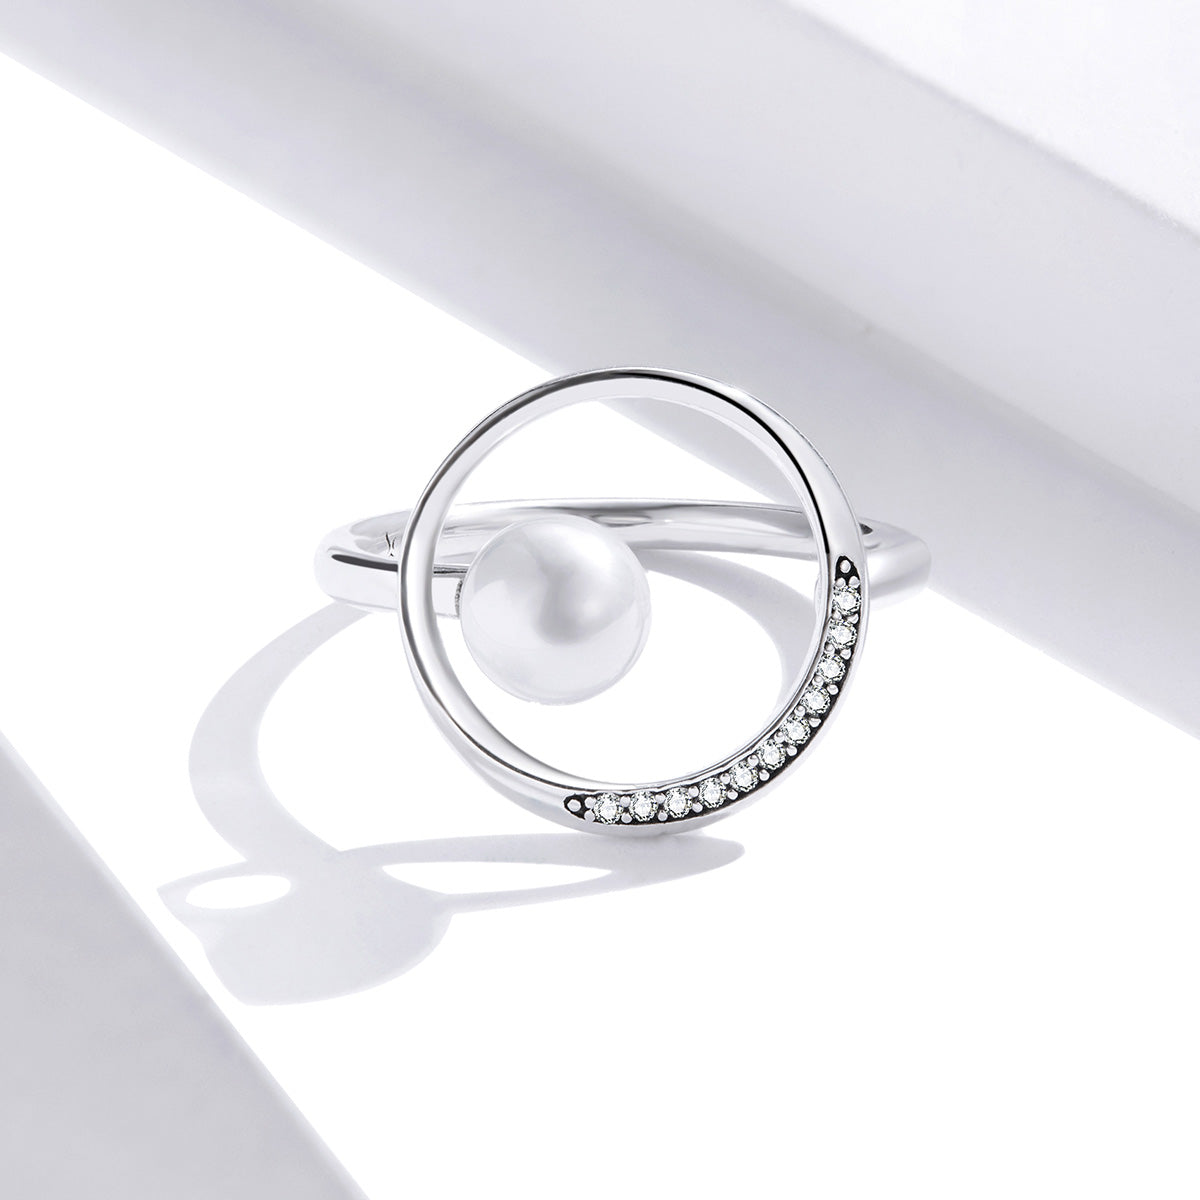 Luna Pearl Ring, Sterling Silver